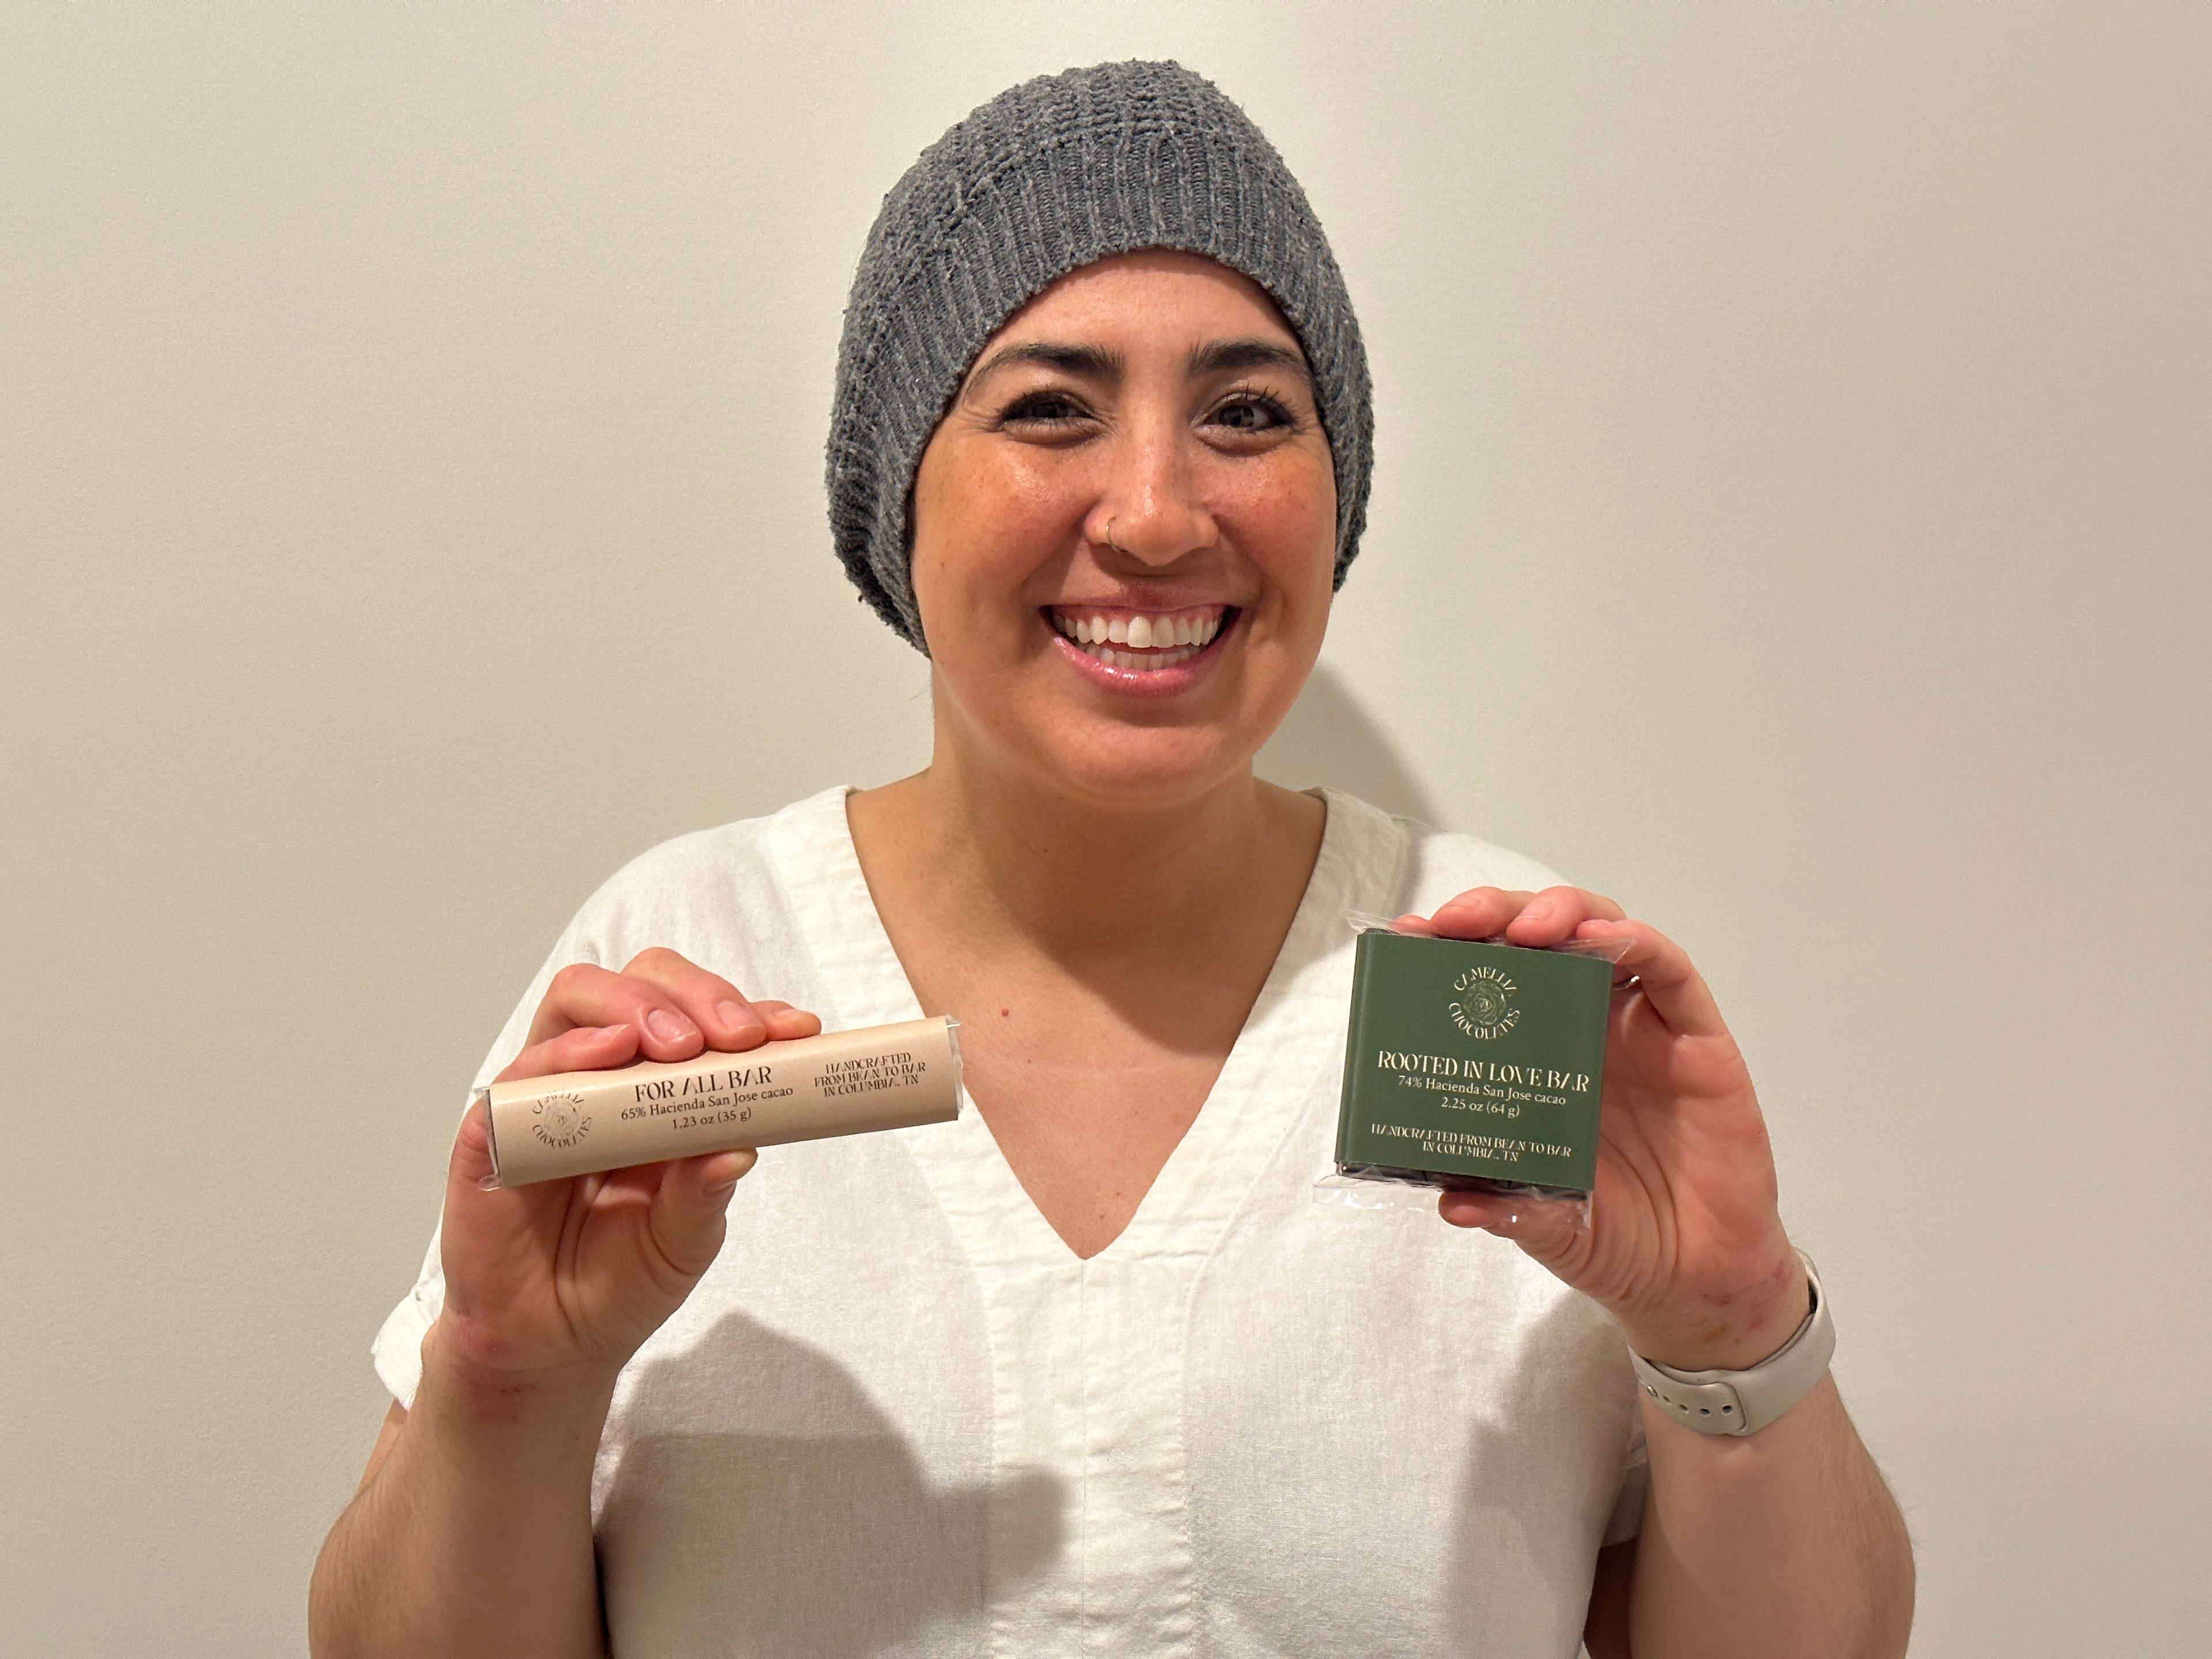 Picture of Camellia Chocolates founder Christine Cole in a white shirt and grey beanie, holding a mini For All Bar in her right hand and a square Rooted in Love Bar in her left hand.